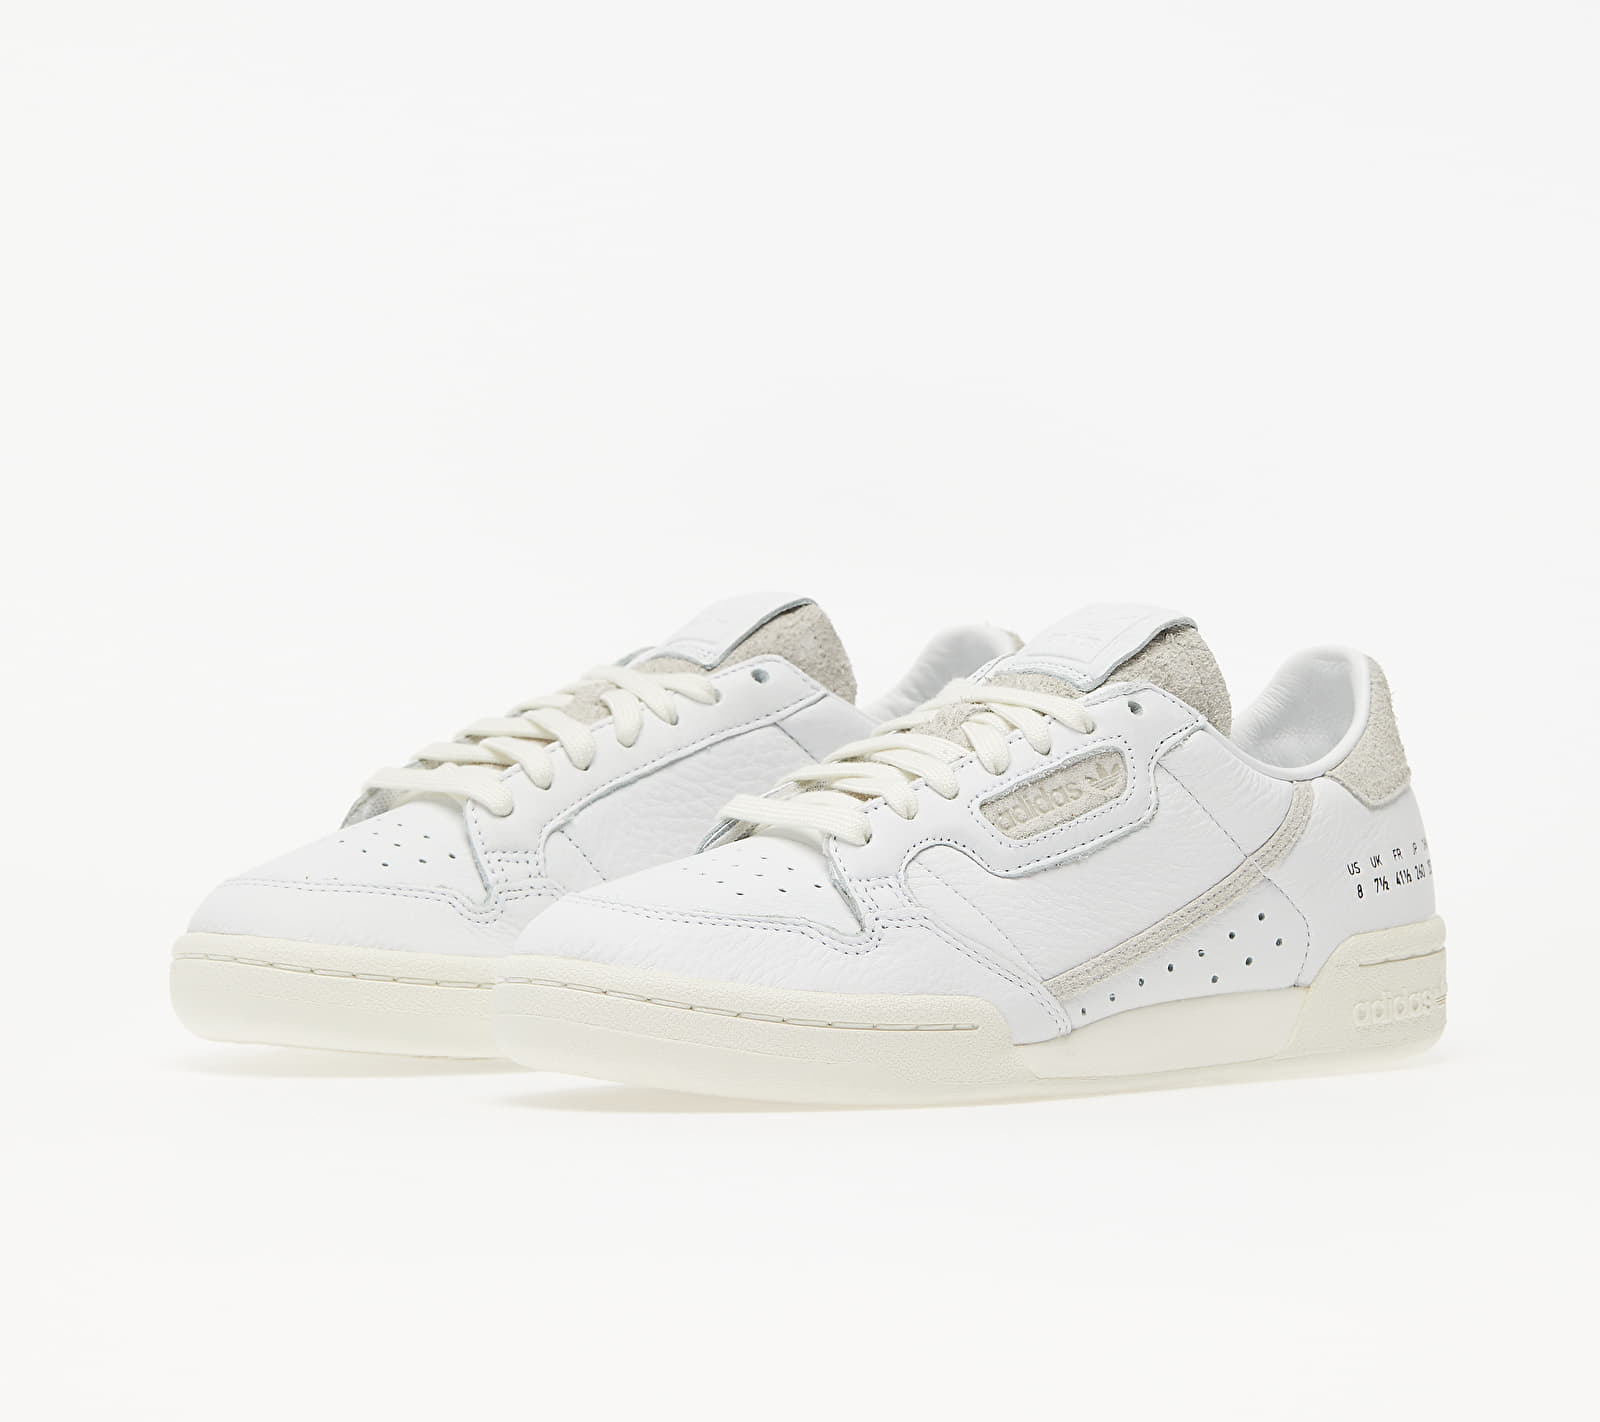 adidas Continental 80 Ftw White/ Crystal White/ Off White FY0036